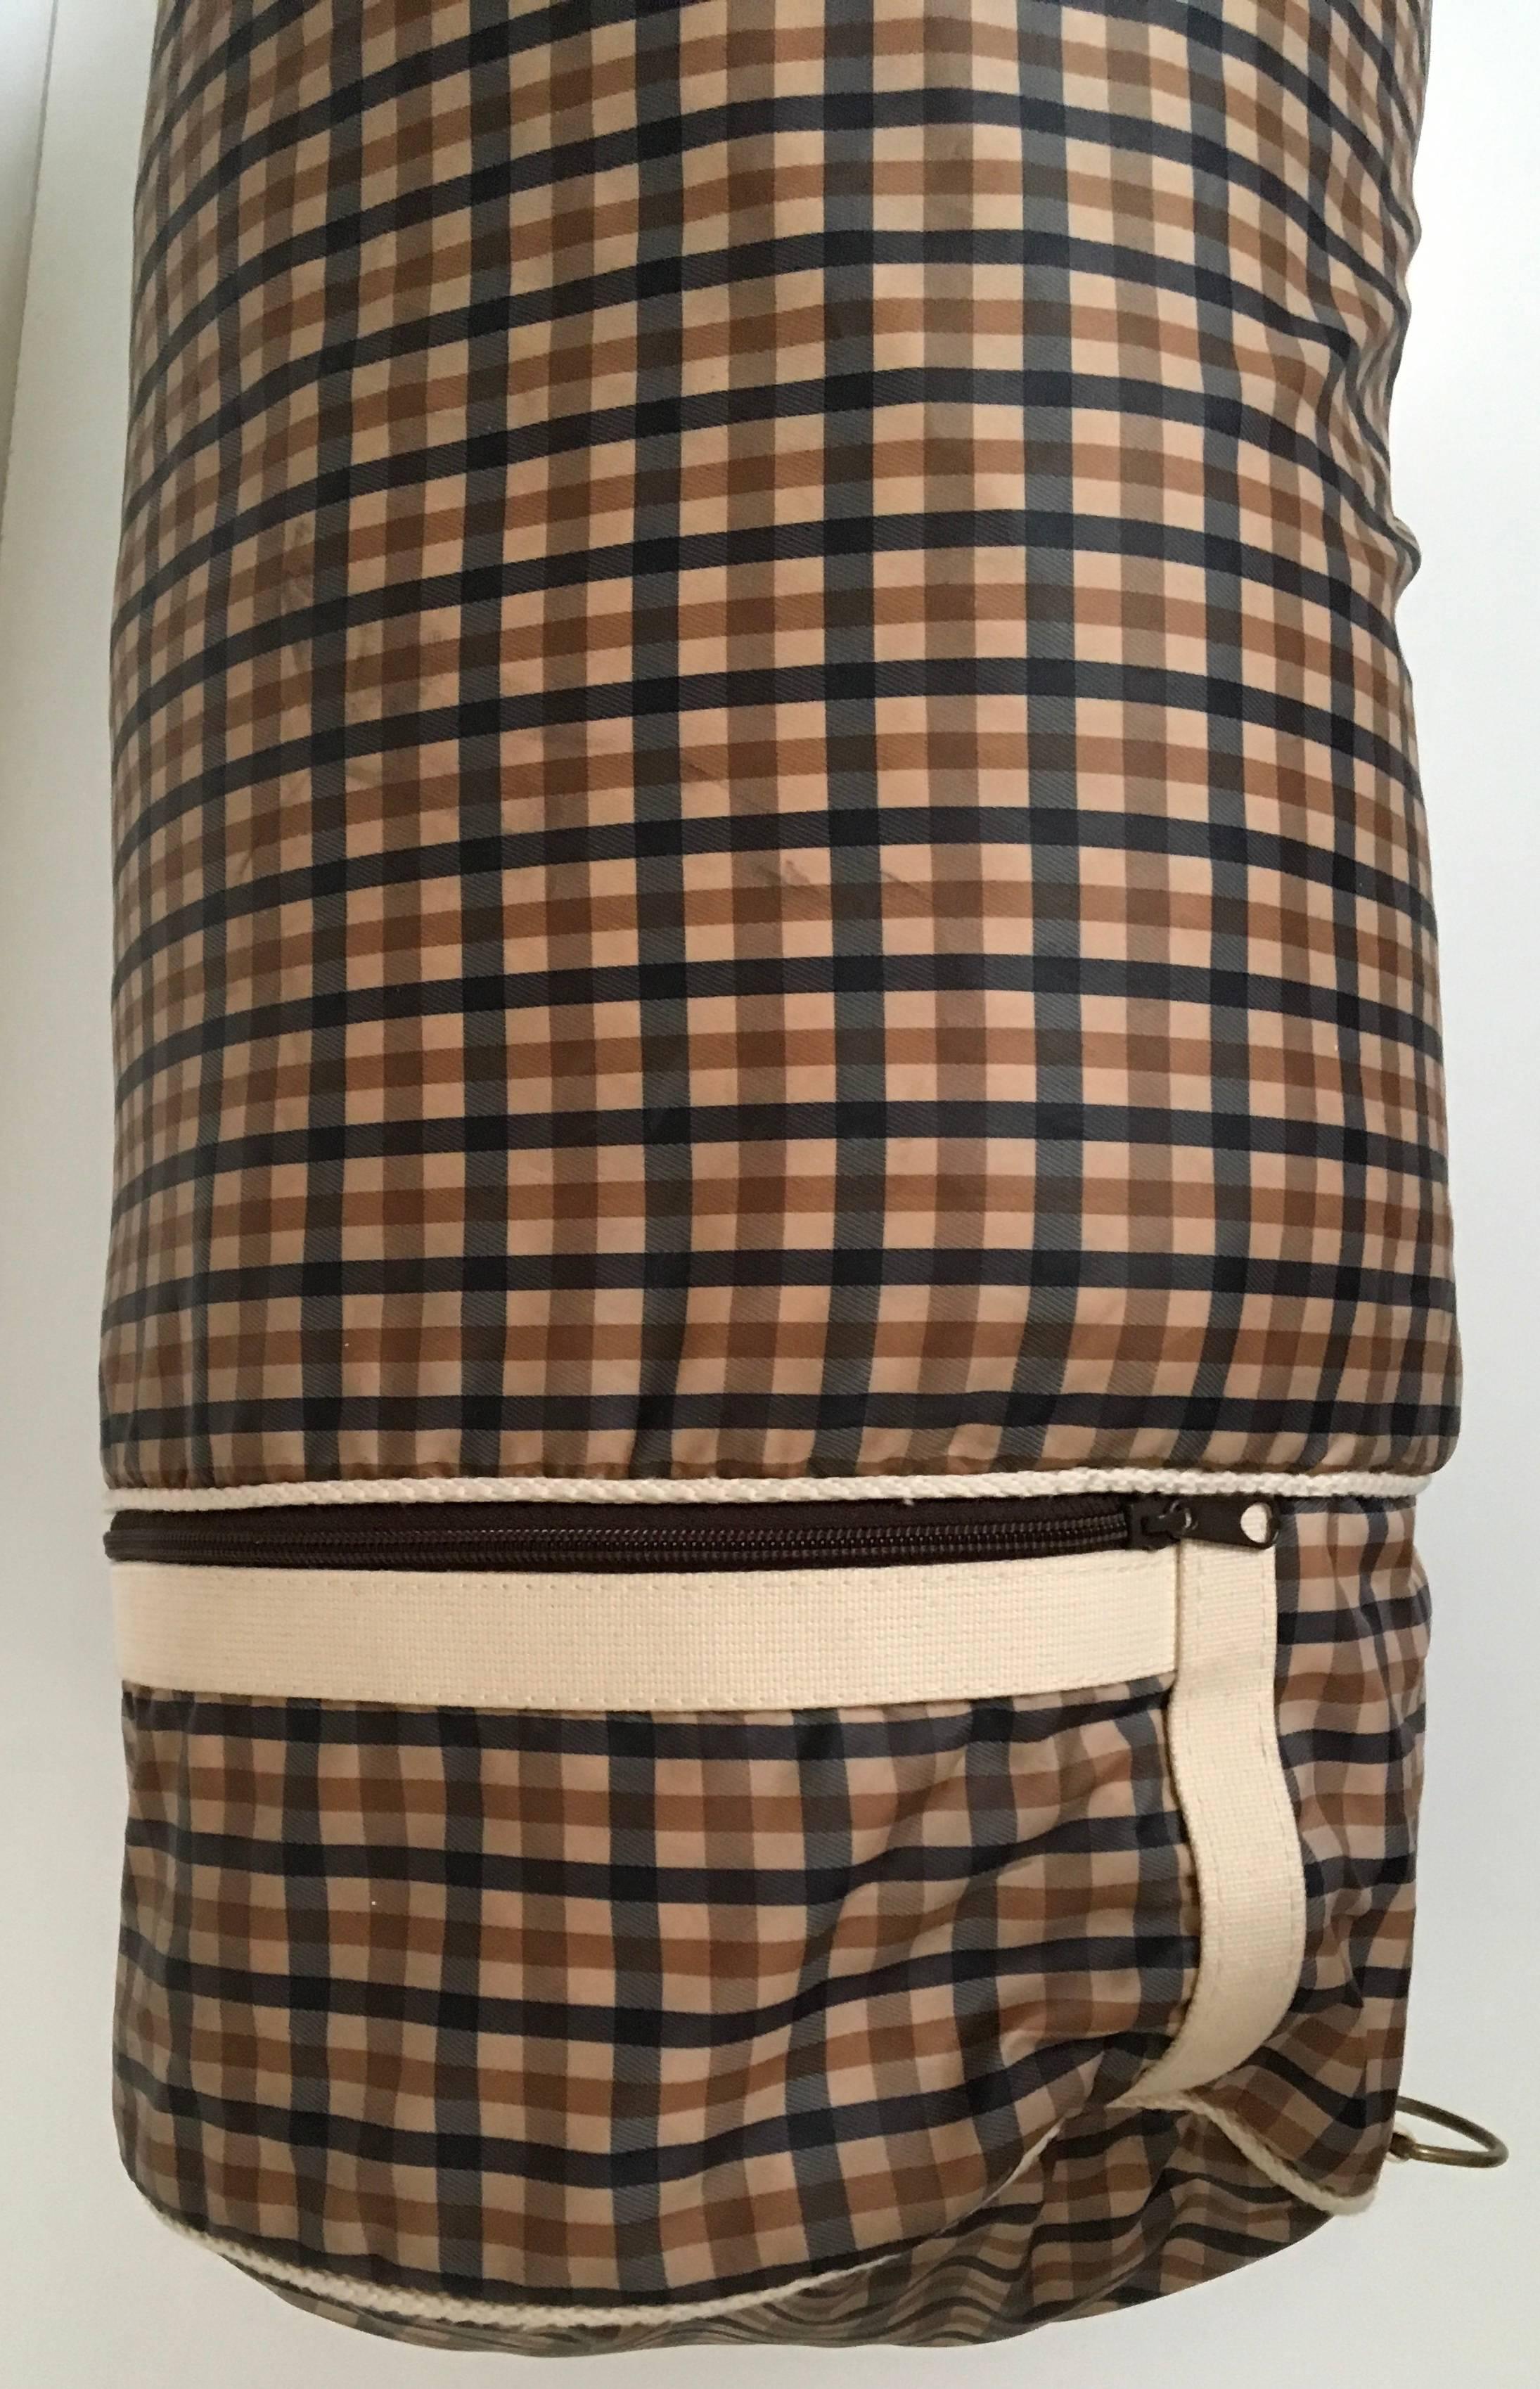 Presented here is a mint condition nylon Aquascutum duffle bag. It is an absolutely fabulous bag because it is very light. It has an adjustable cream colored canvas 1.5 inch strap. There is a rope tightening strap at the top with a 1.5 inch piece of